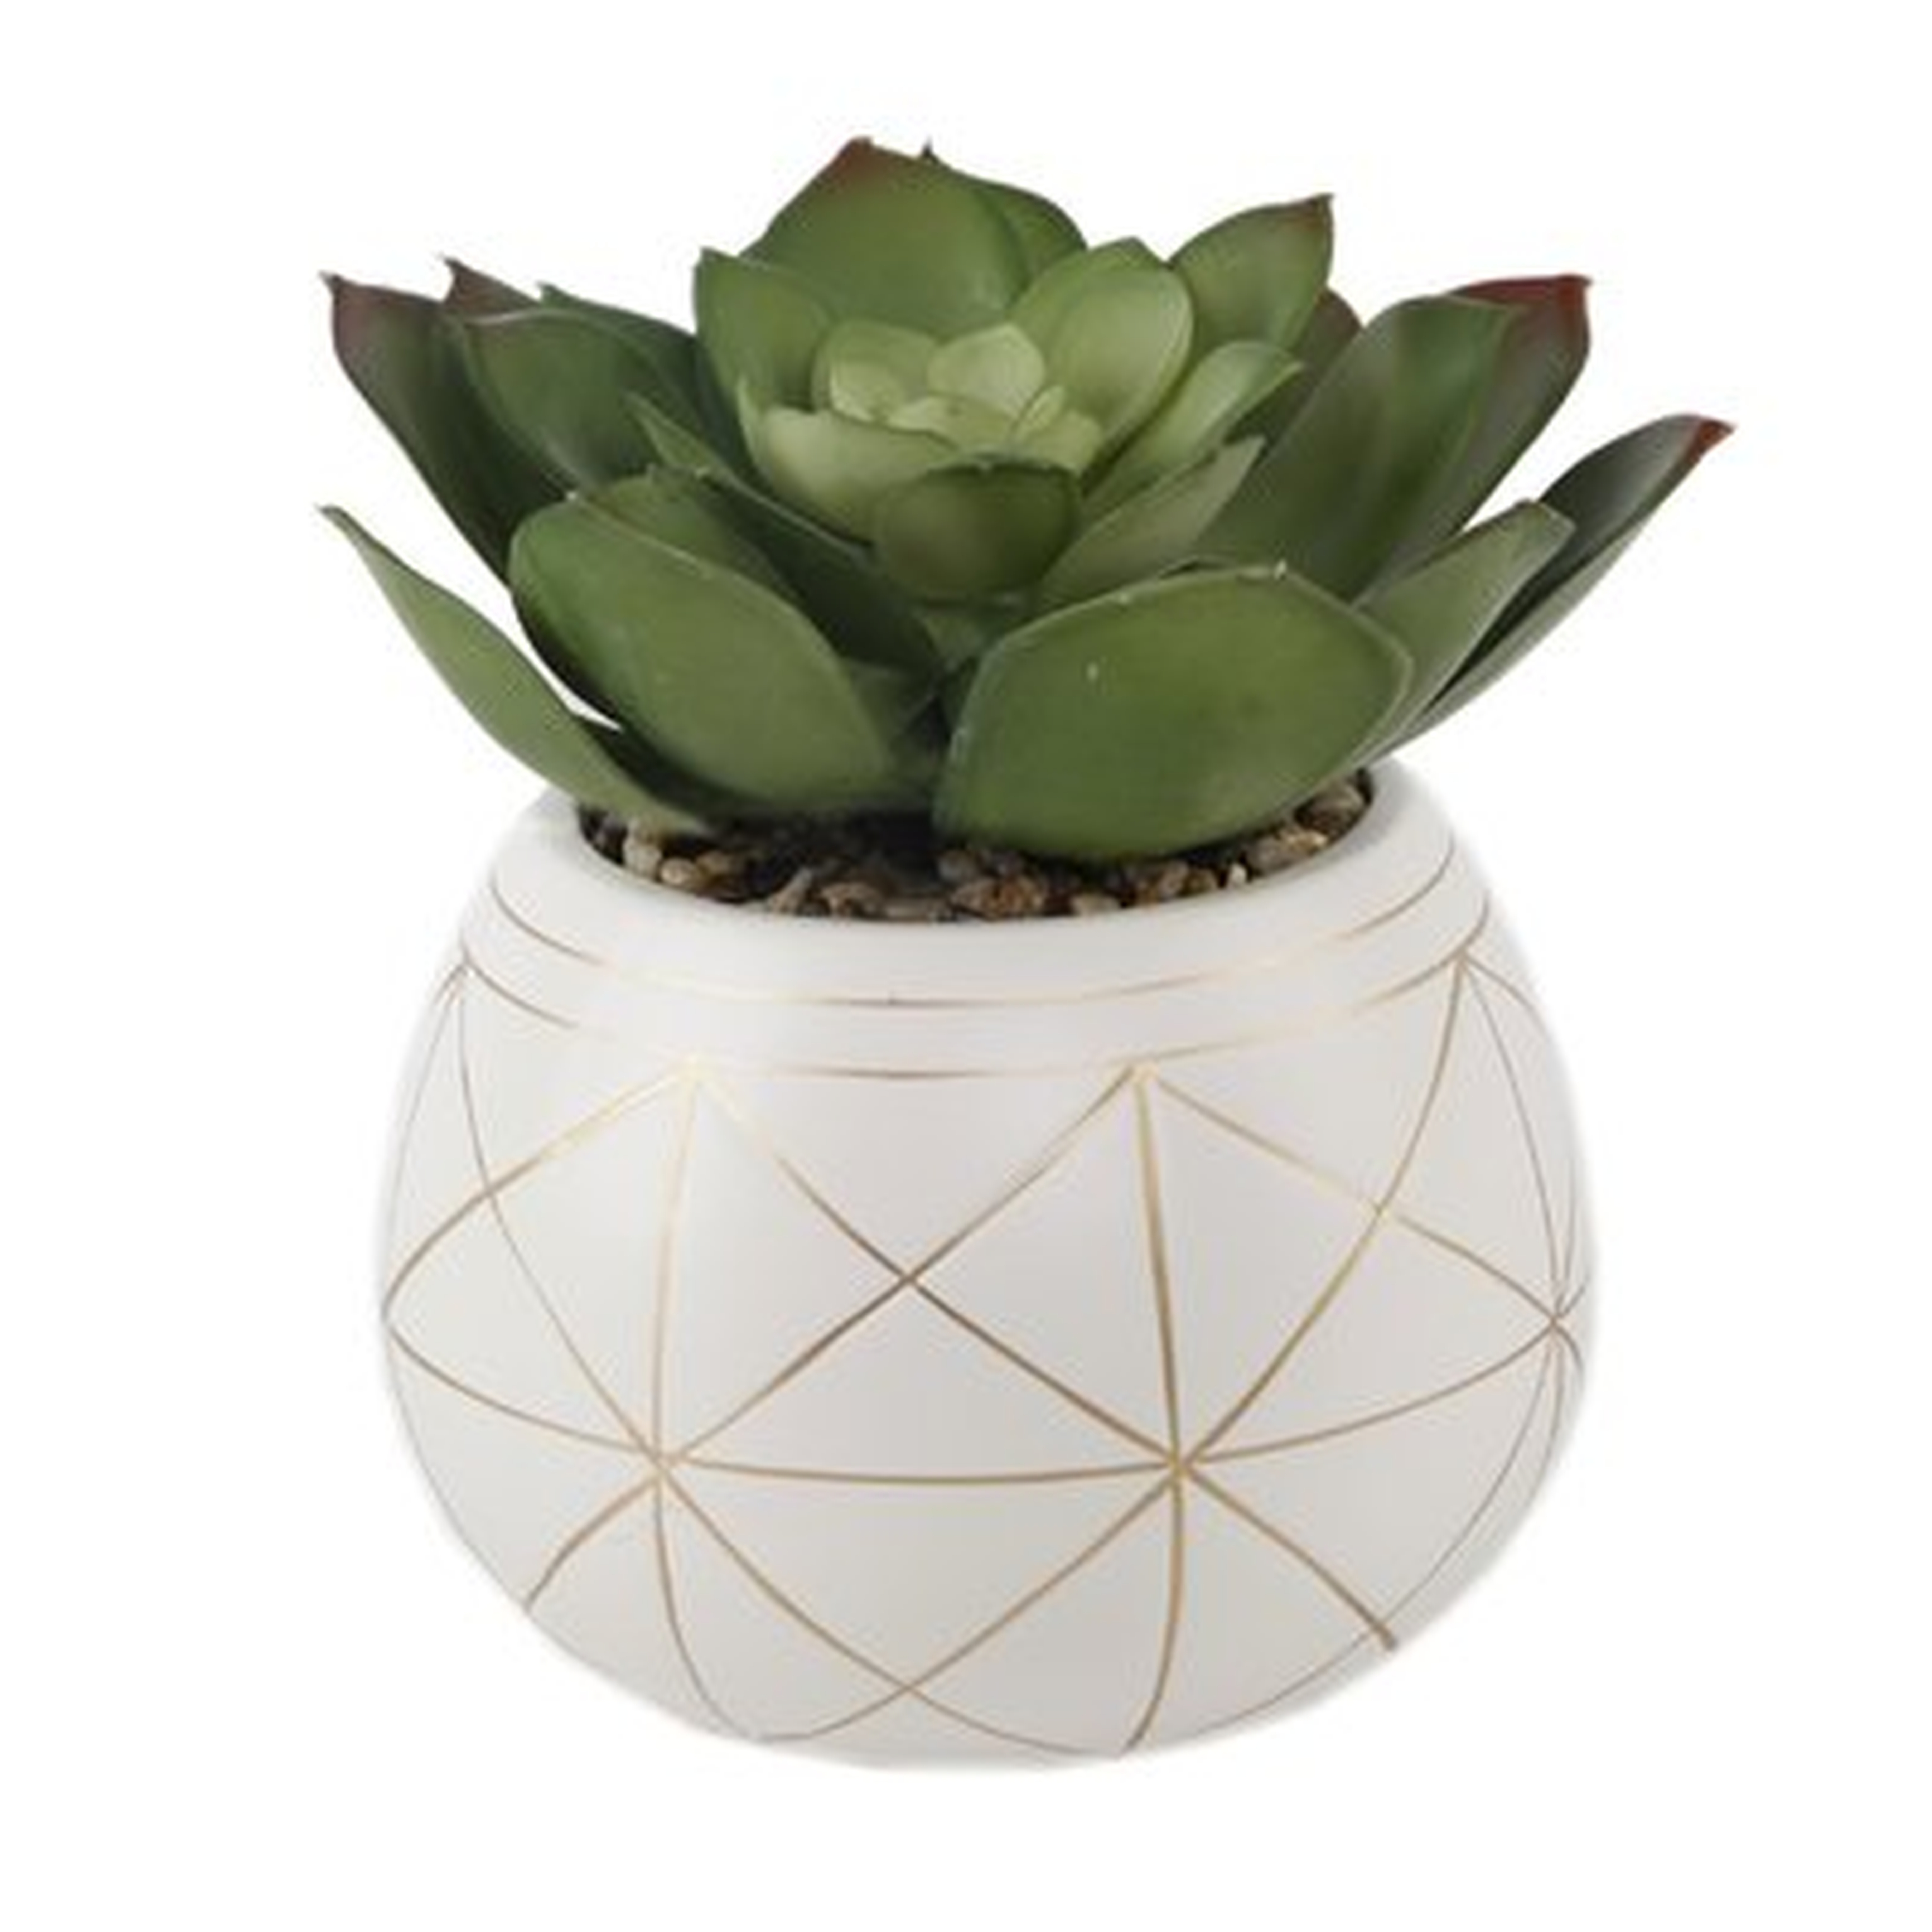 Geo Hand Painted Ceramic Agave Plant in Planter - Wayfair